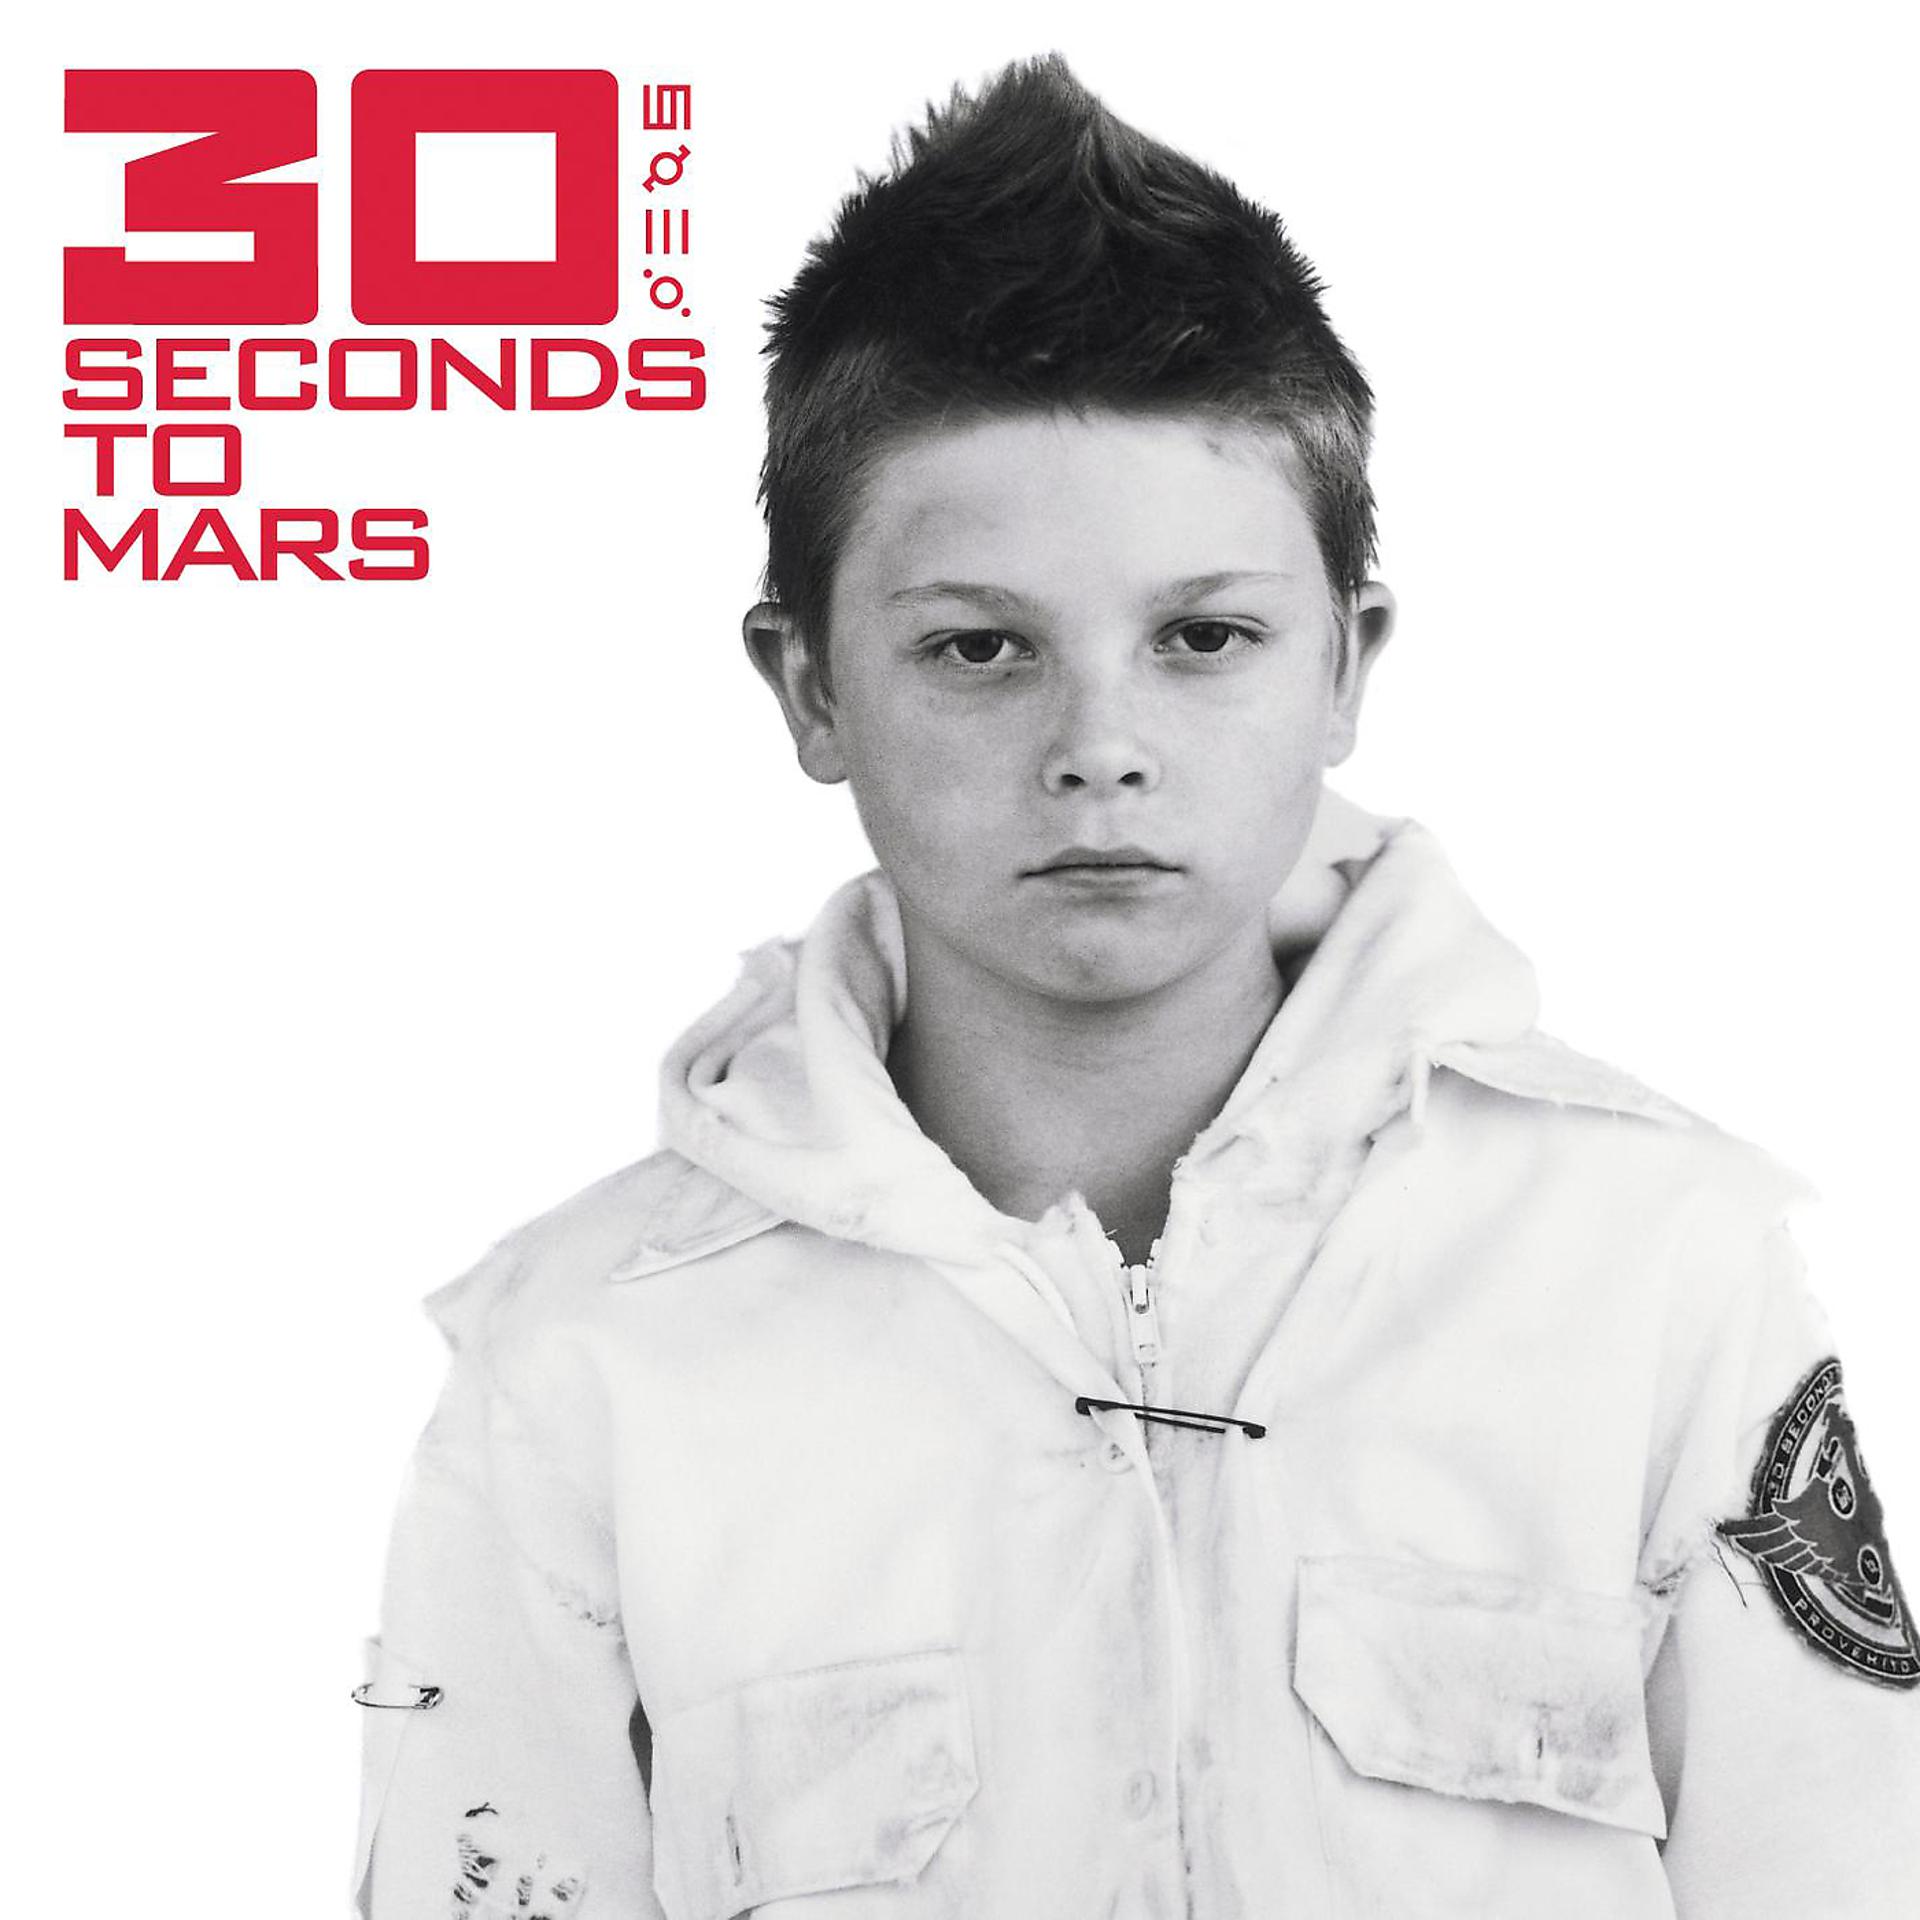 30 seconds to mars edge of the. 30 Seconds to Mars 30 seconds to Mars. 30 Seconds to Mars 2002. 30 Seconds to Mars обложки альбомов. 30 Seconds to Mars CD.